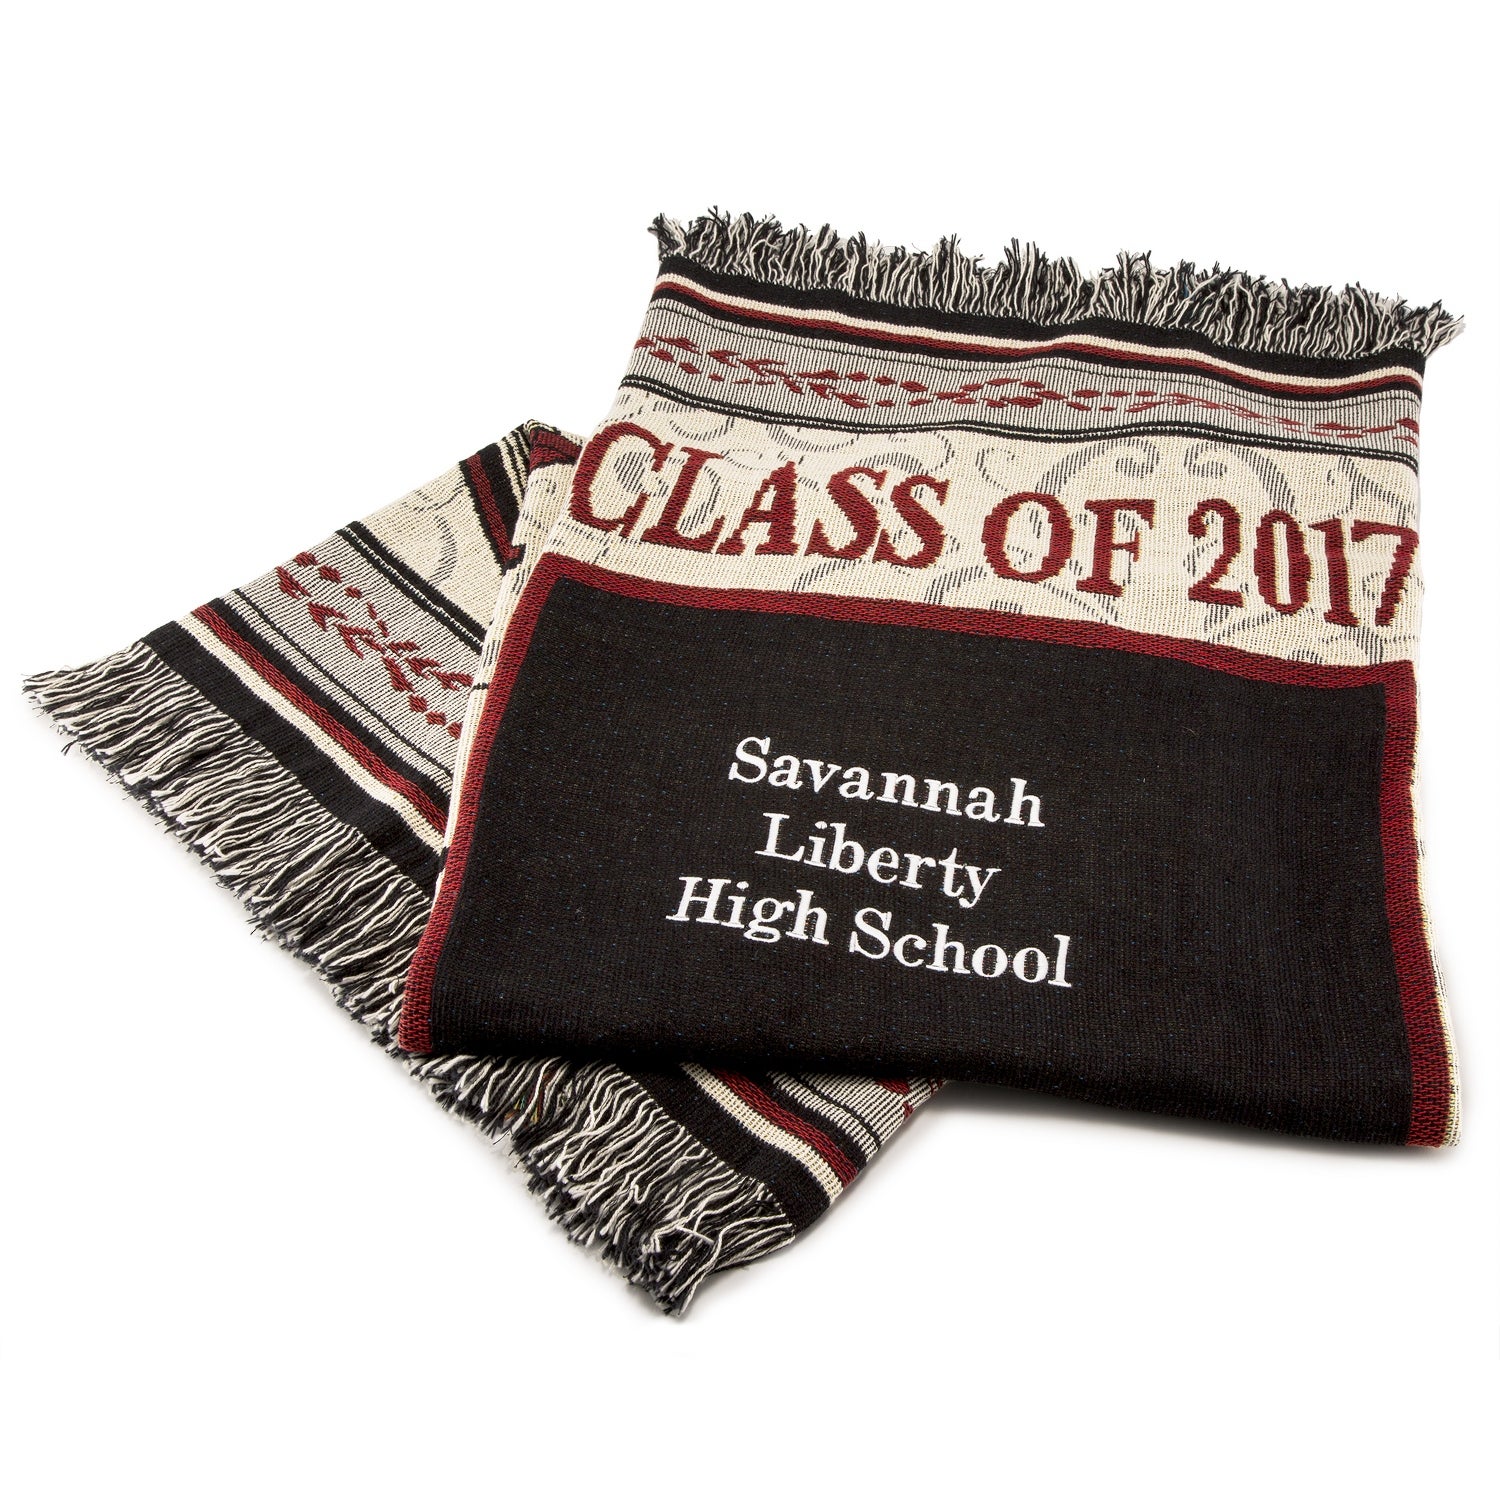 10 High School Graduation Gifts They'll Actually Use
